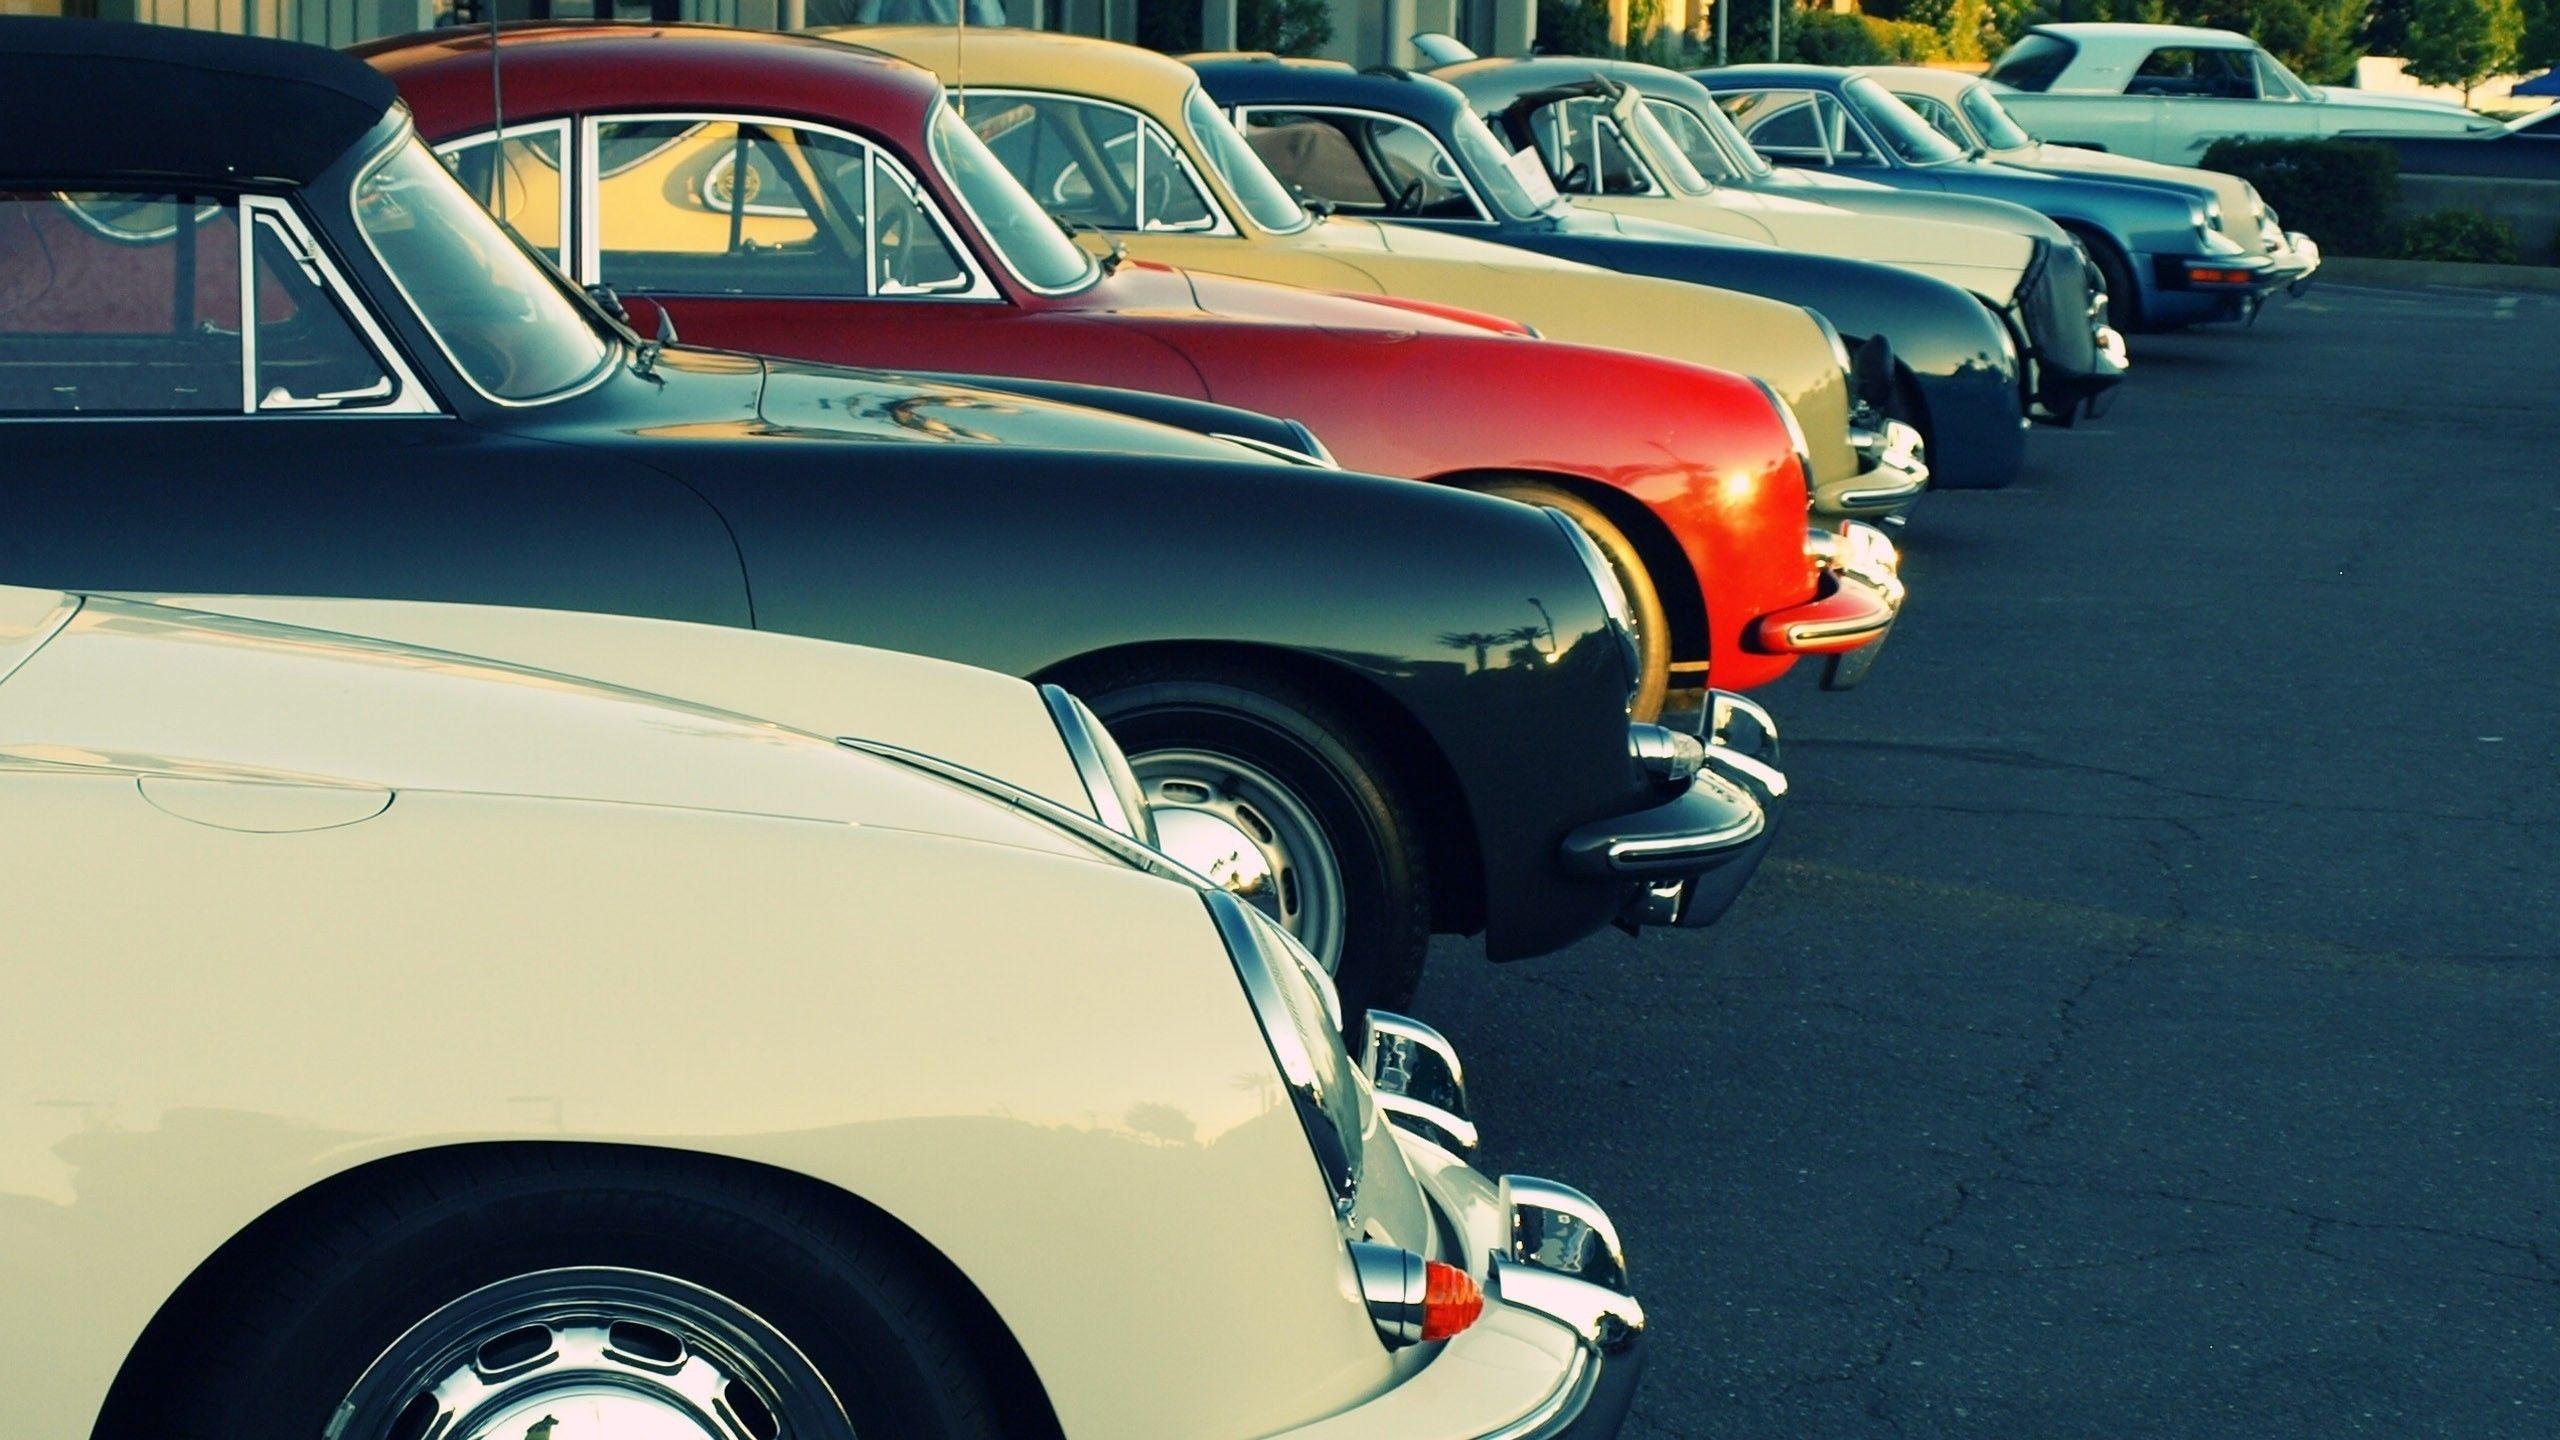 Vintage and Classic Cars in Row Image